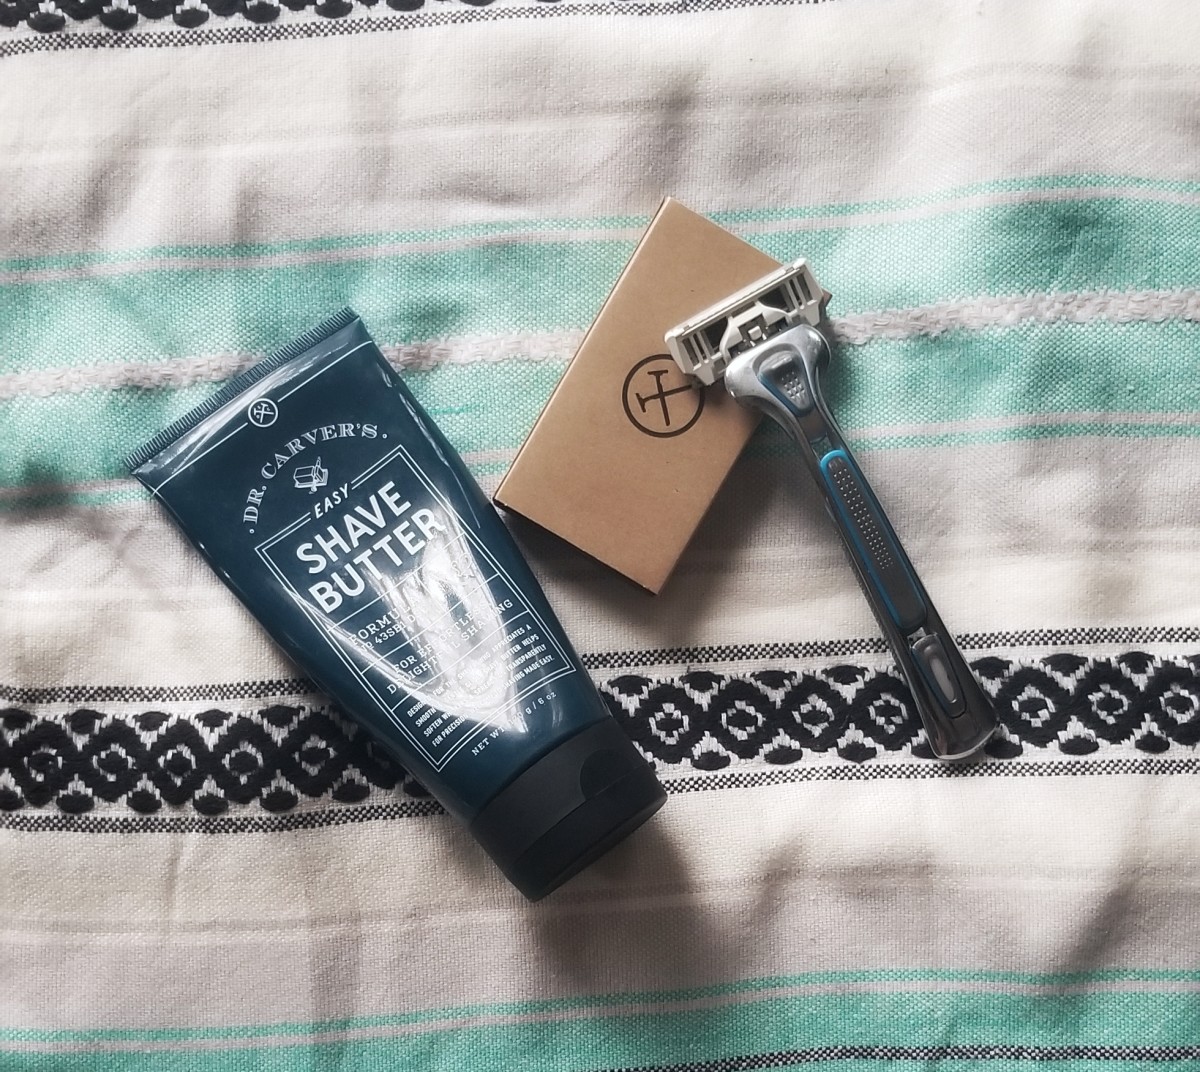 Dollar Shave Club is a great way to save money on all your shaving and hygiene needs.